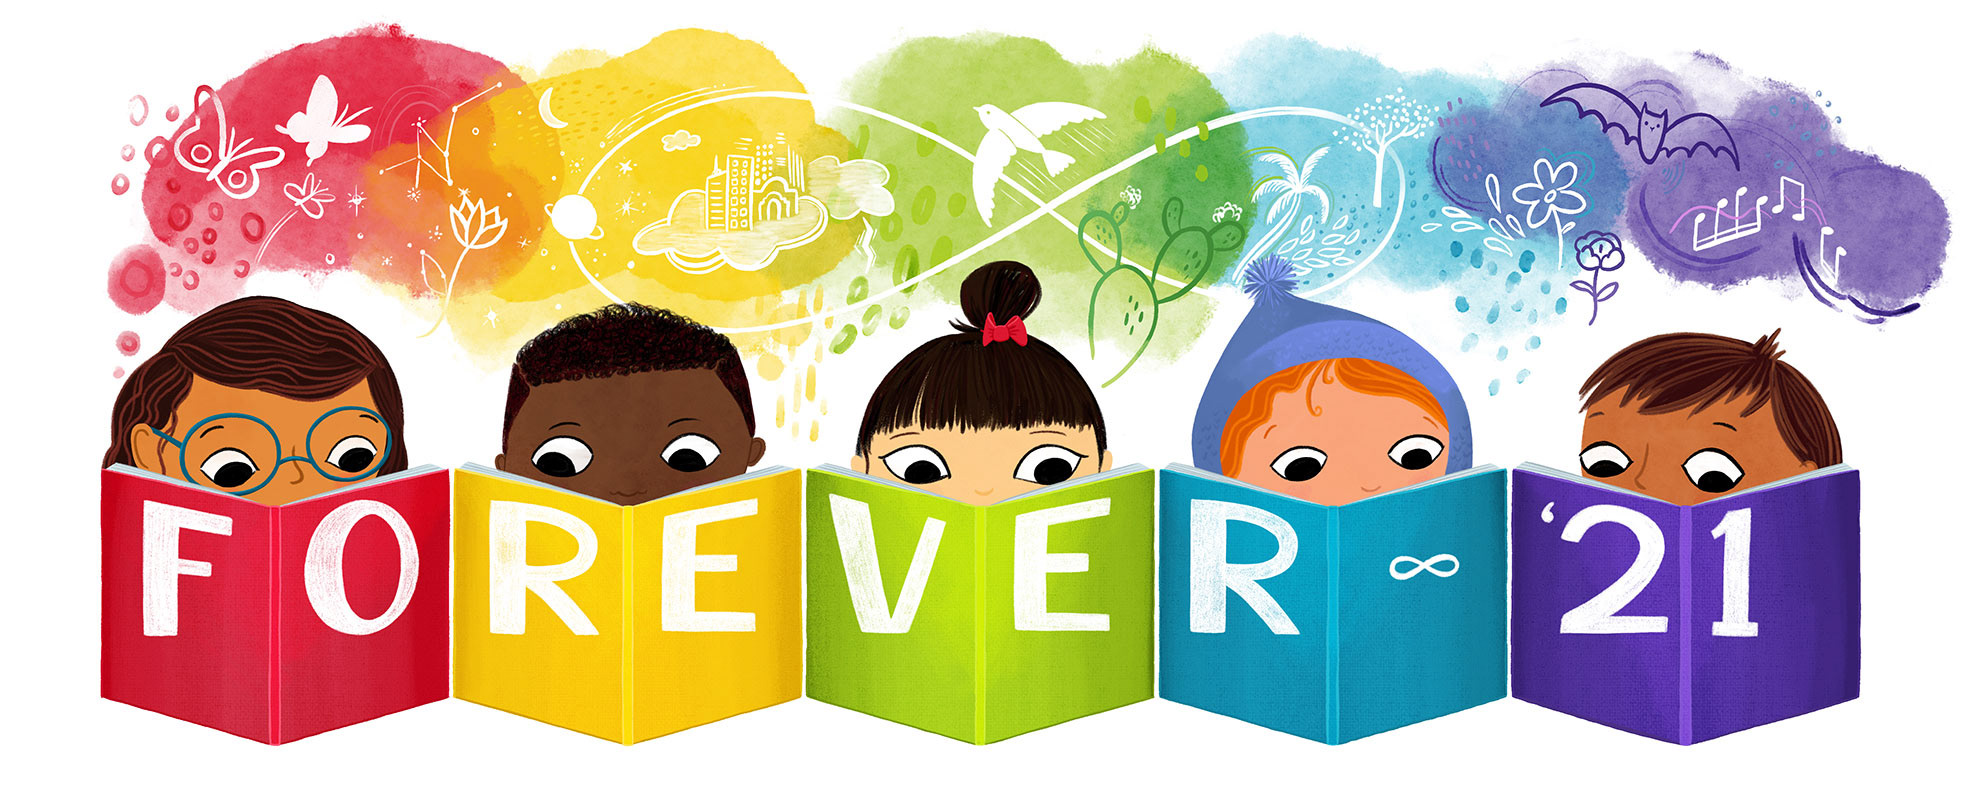 Forever 21 PBS Banner, showing 5 children reading colourful books